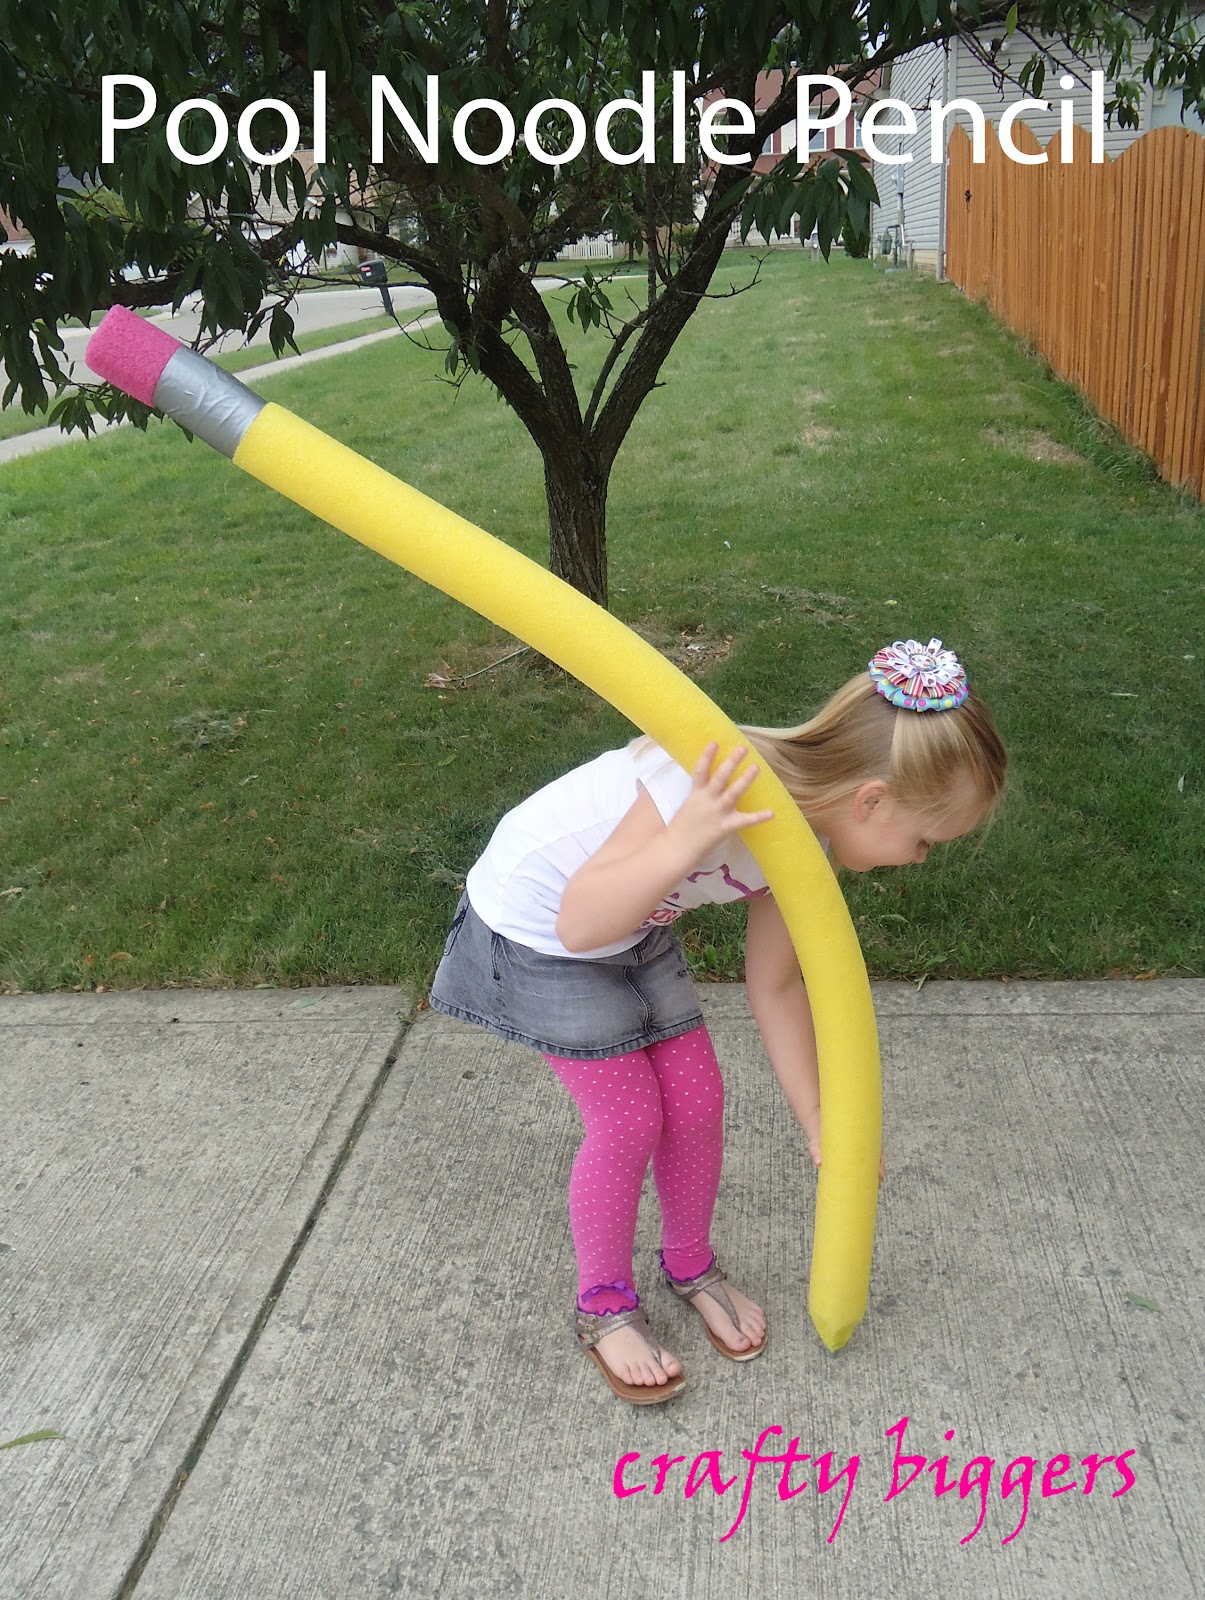 How to make giant pencils out of dollar store pool noodles! – oh